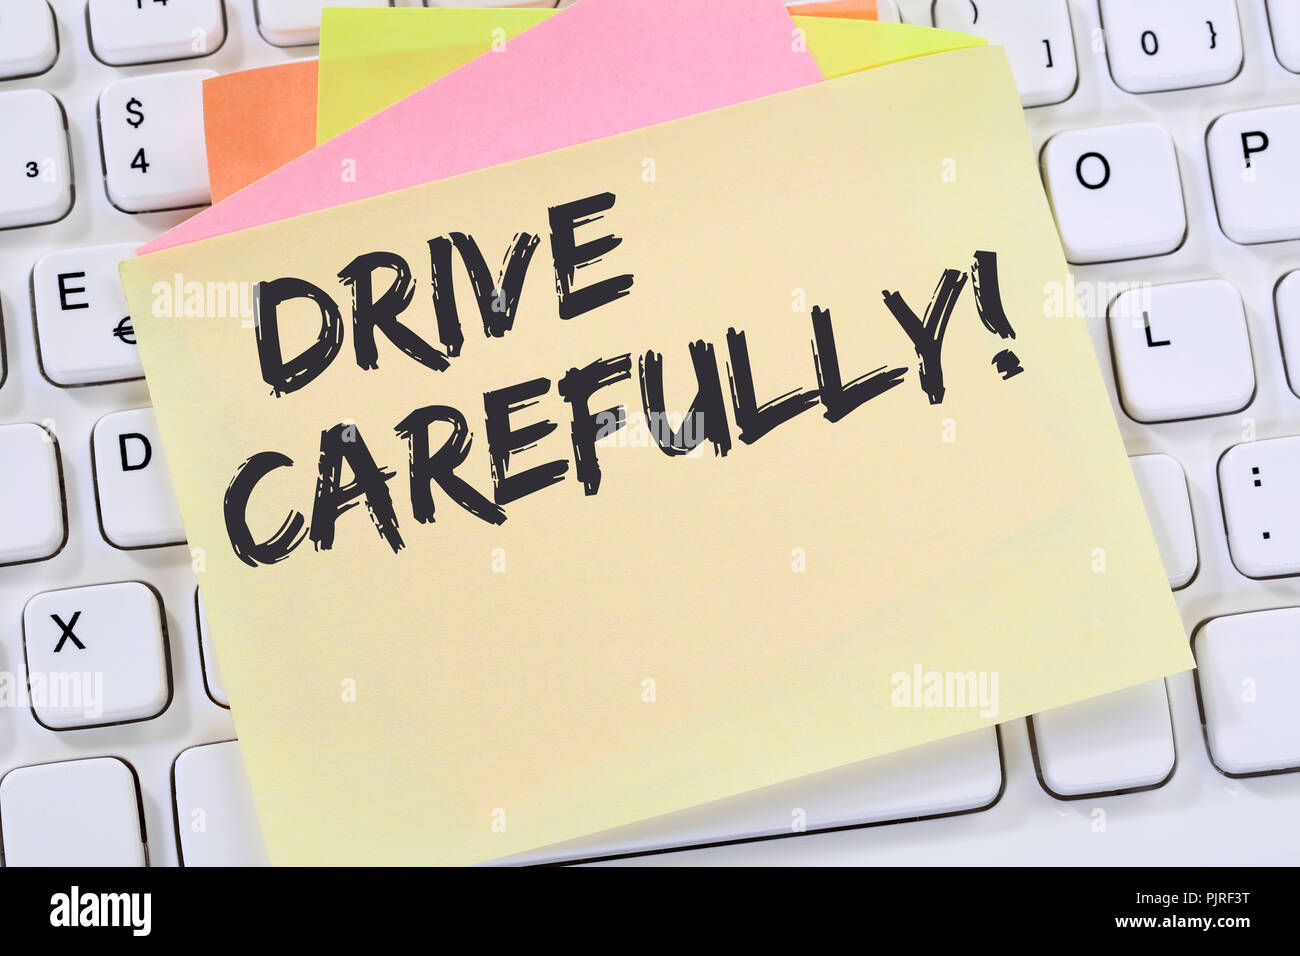 Drive carefully driving car accident traffic notepaper business concept computer keyboard Stock Photo